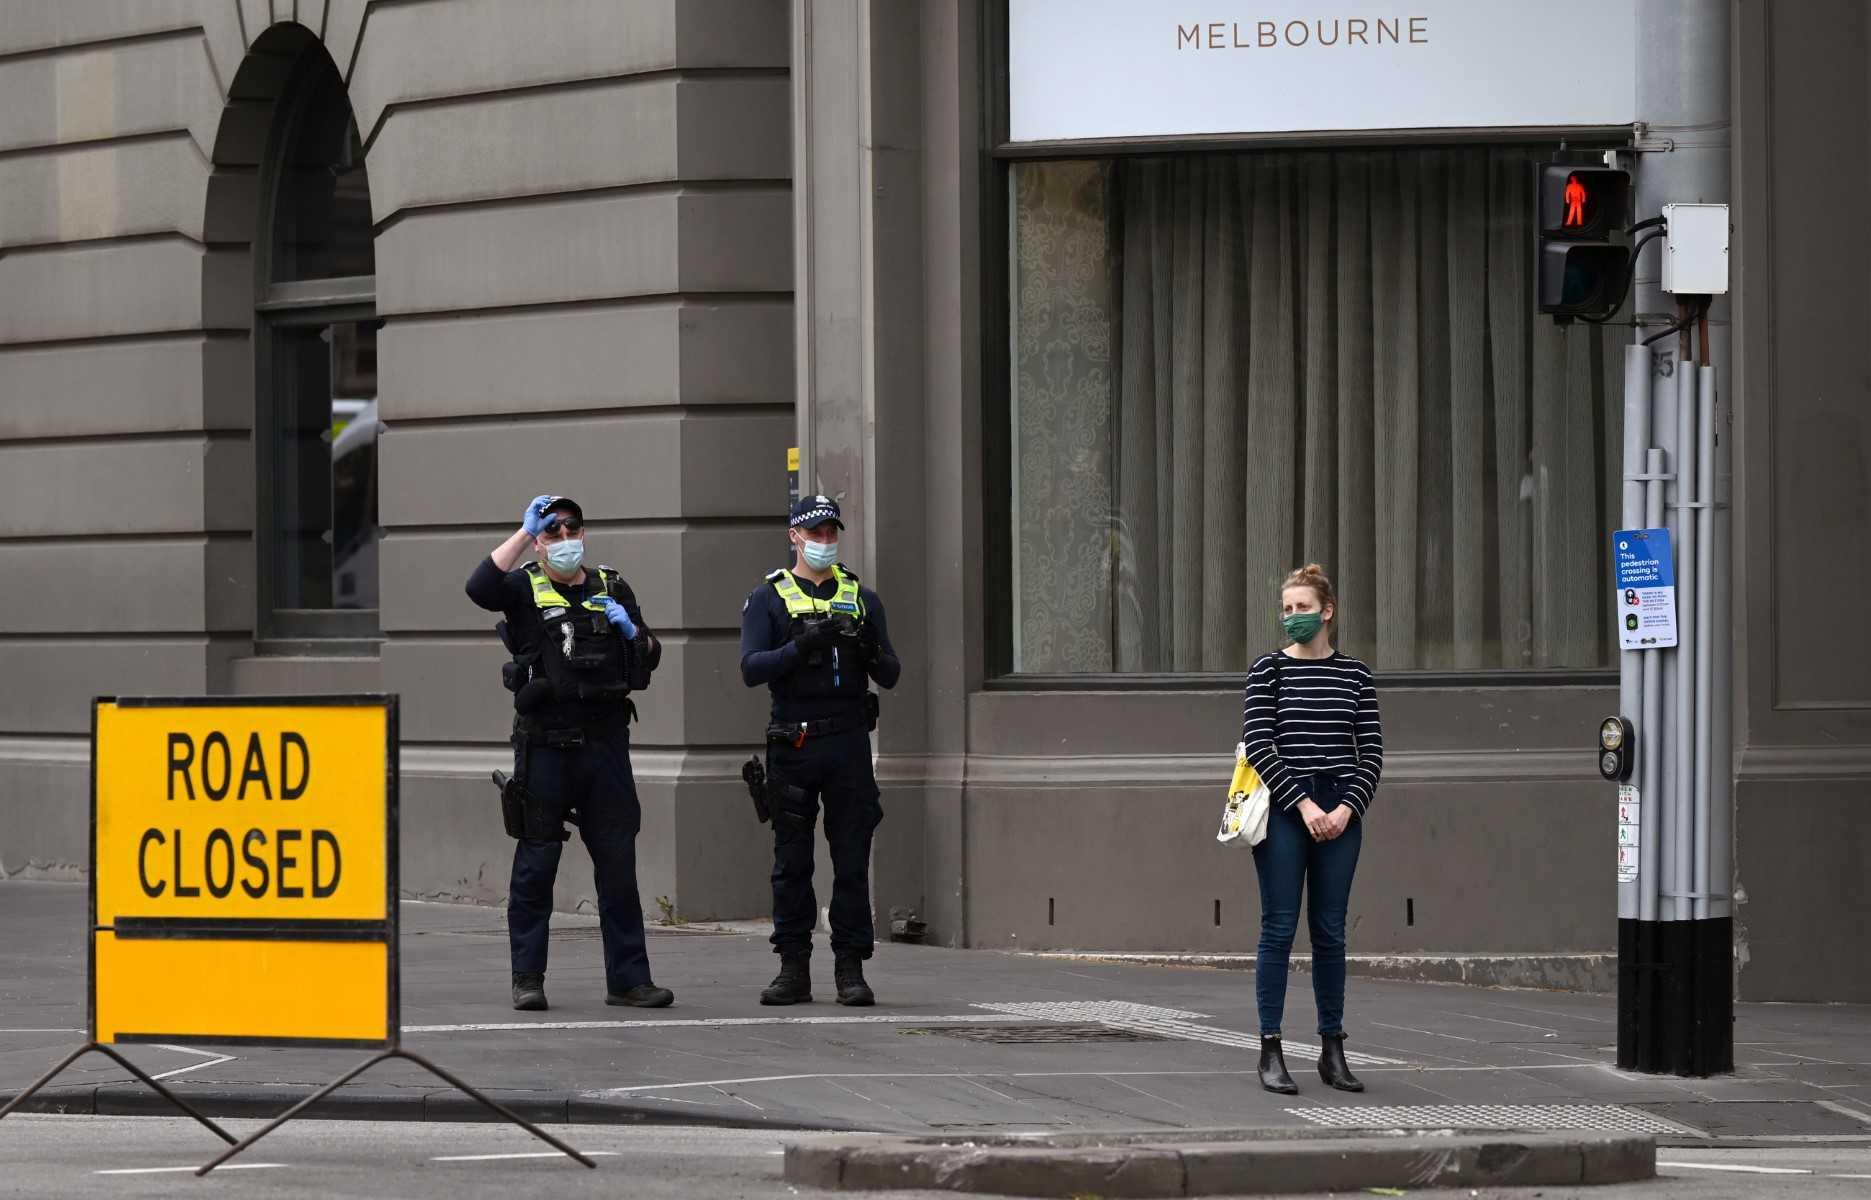 Police patrol the streets in Melbourne on Sept 30, 2021 as the city grapples with a surge in Covid-19 infections. Photo: AFP 